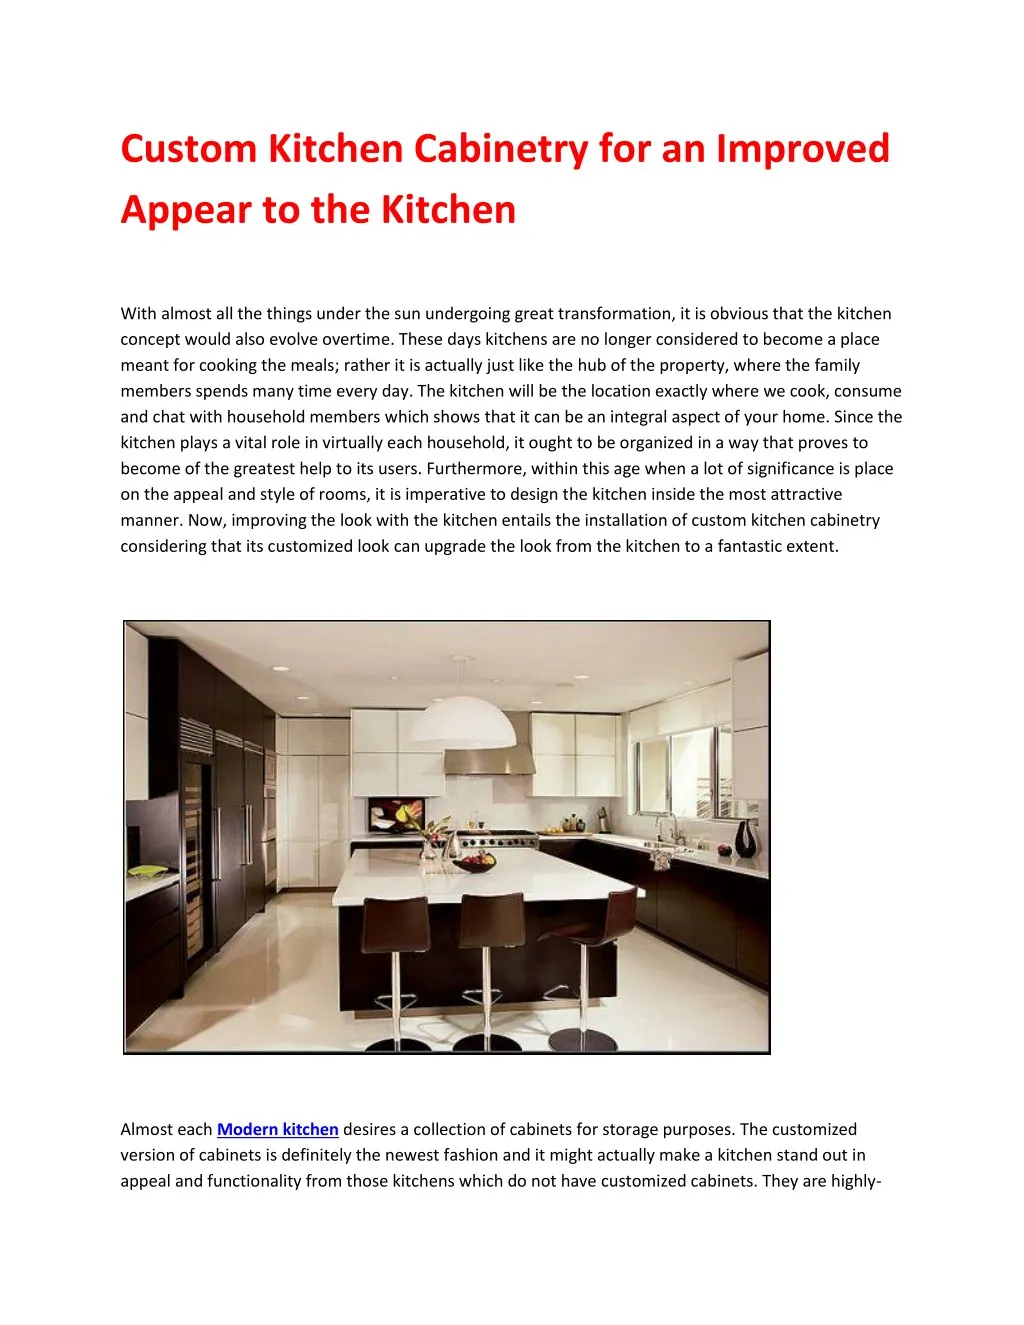 custom kitchen cabinetry for an improved appear